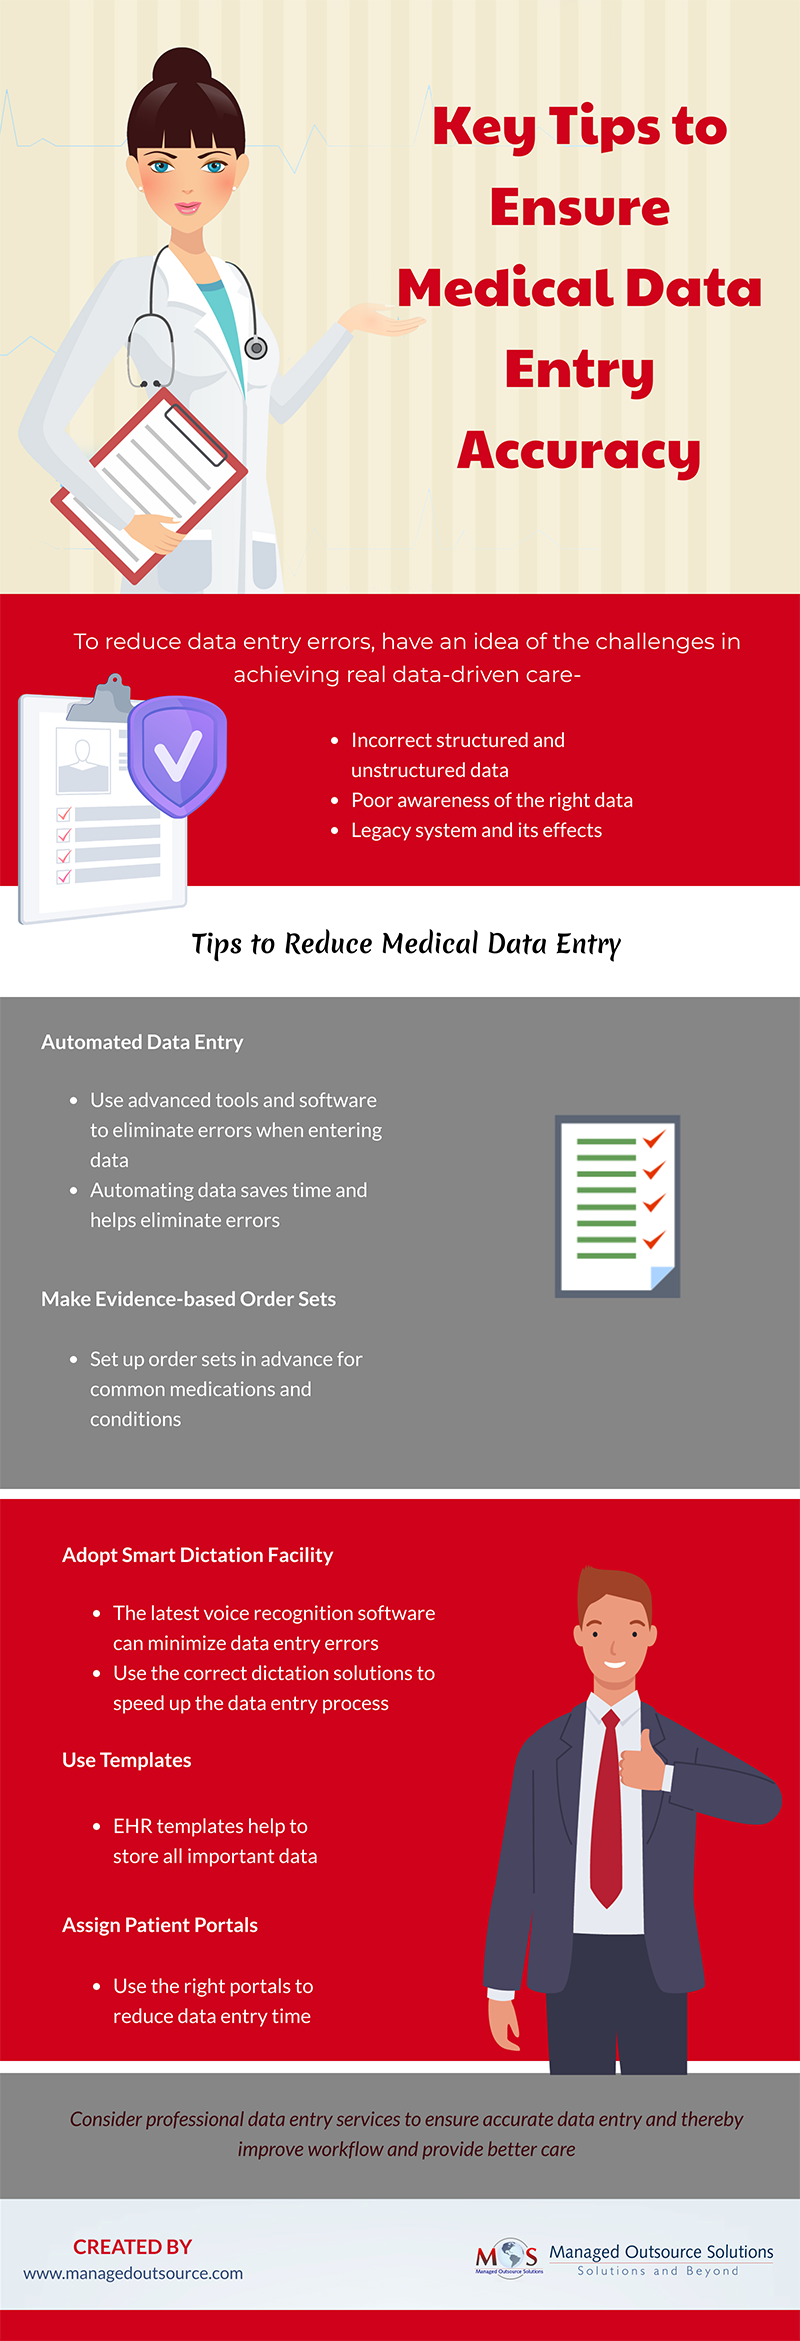 Medical Data Entry Accuracy